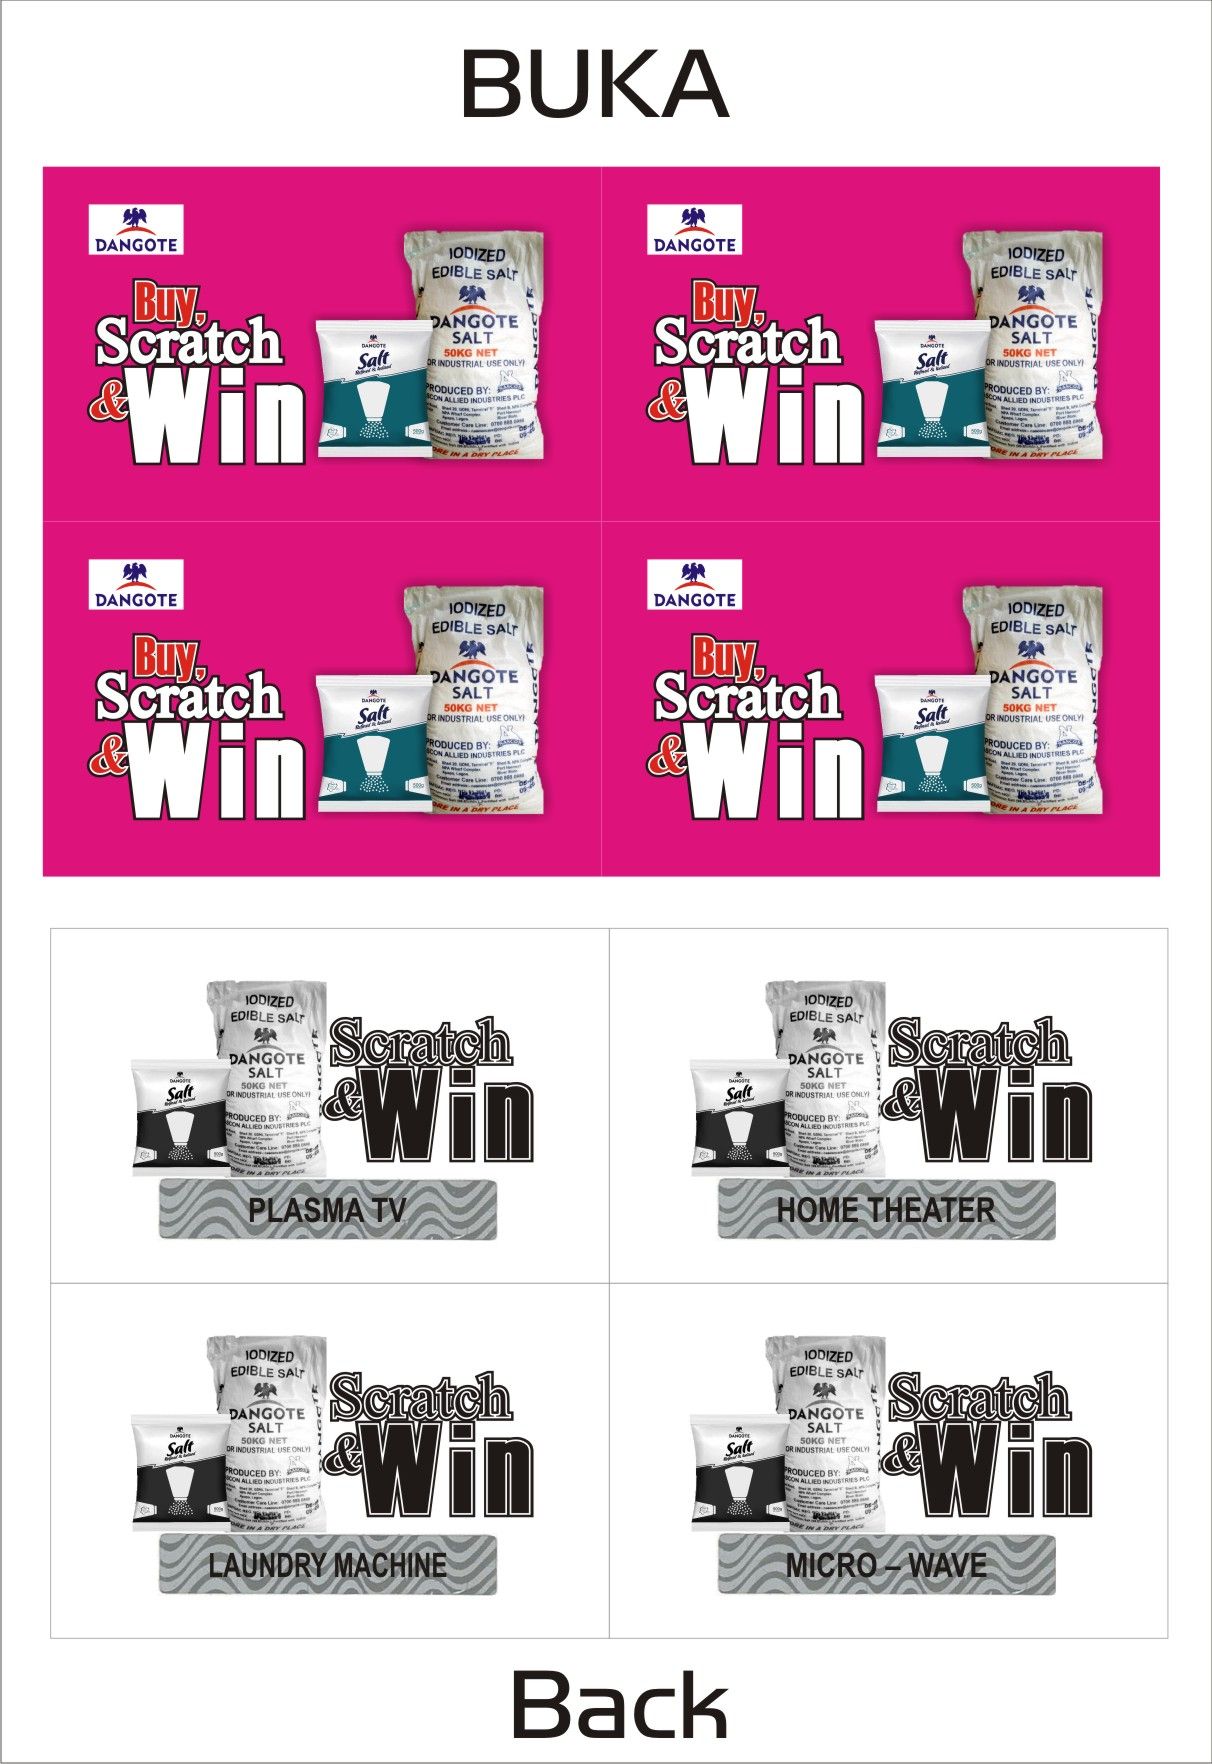 CALL CHINEDU ON 09022536974 TO PRINT SCRATCH AND WIN PROMO CARDS, PORTAL ACCESS CARDS, LOTTERY CARDS, PRODUCT LABELS, AUTHENTICATION LABELS